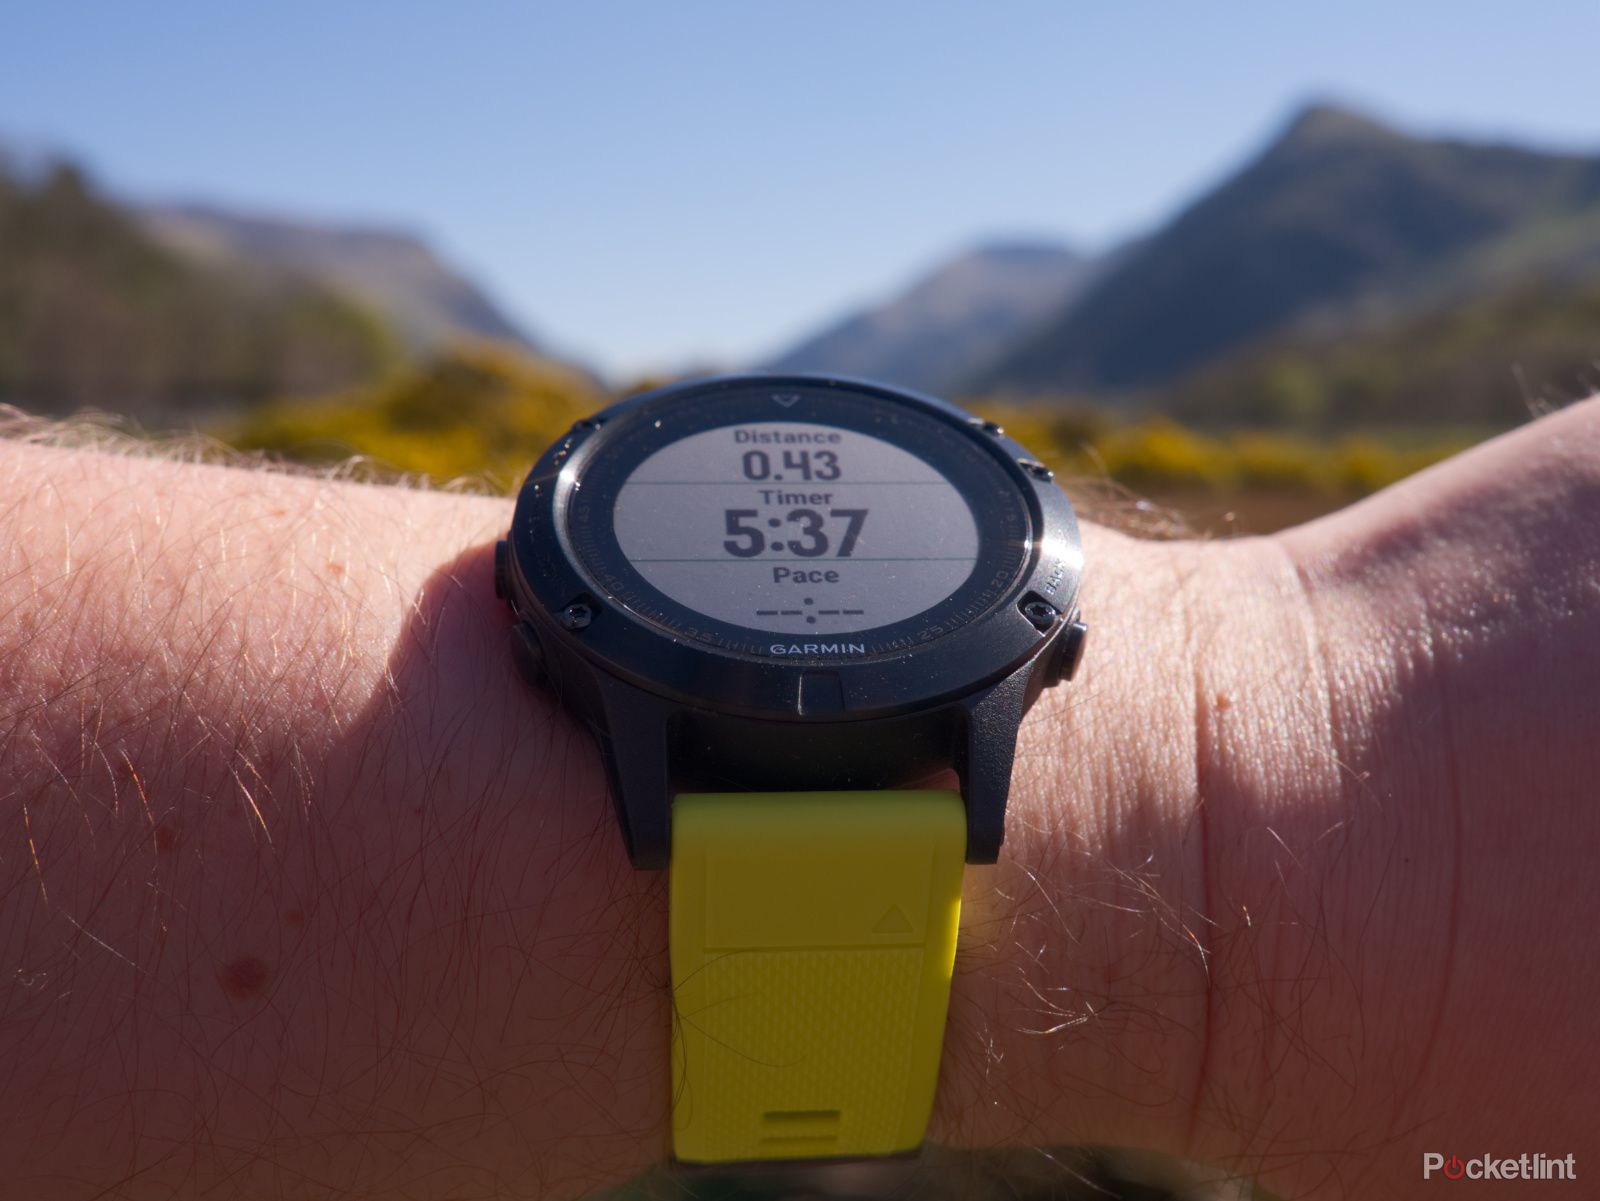 5 reasons to buy the awesome garmin fenix 5 image 1